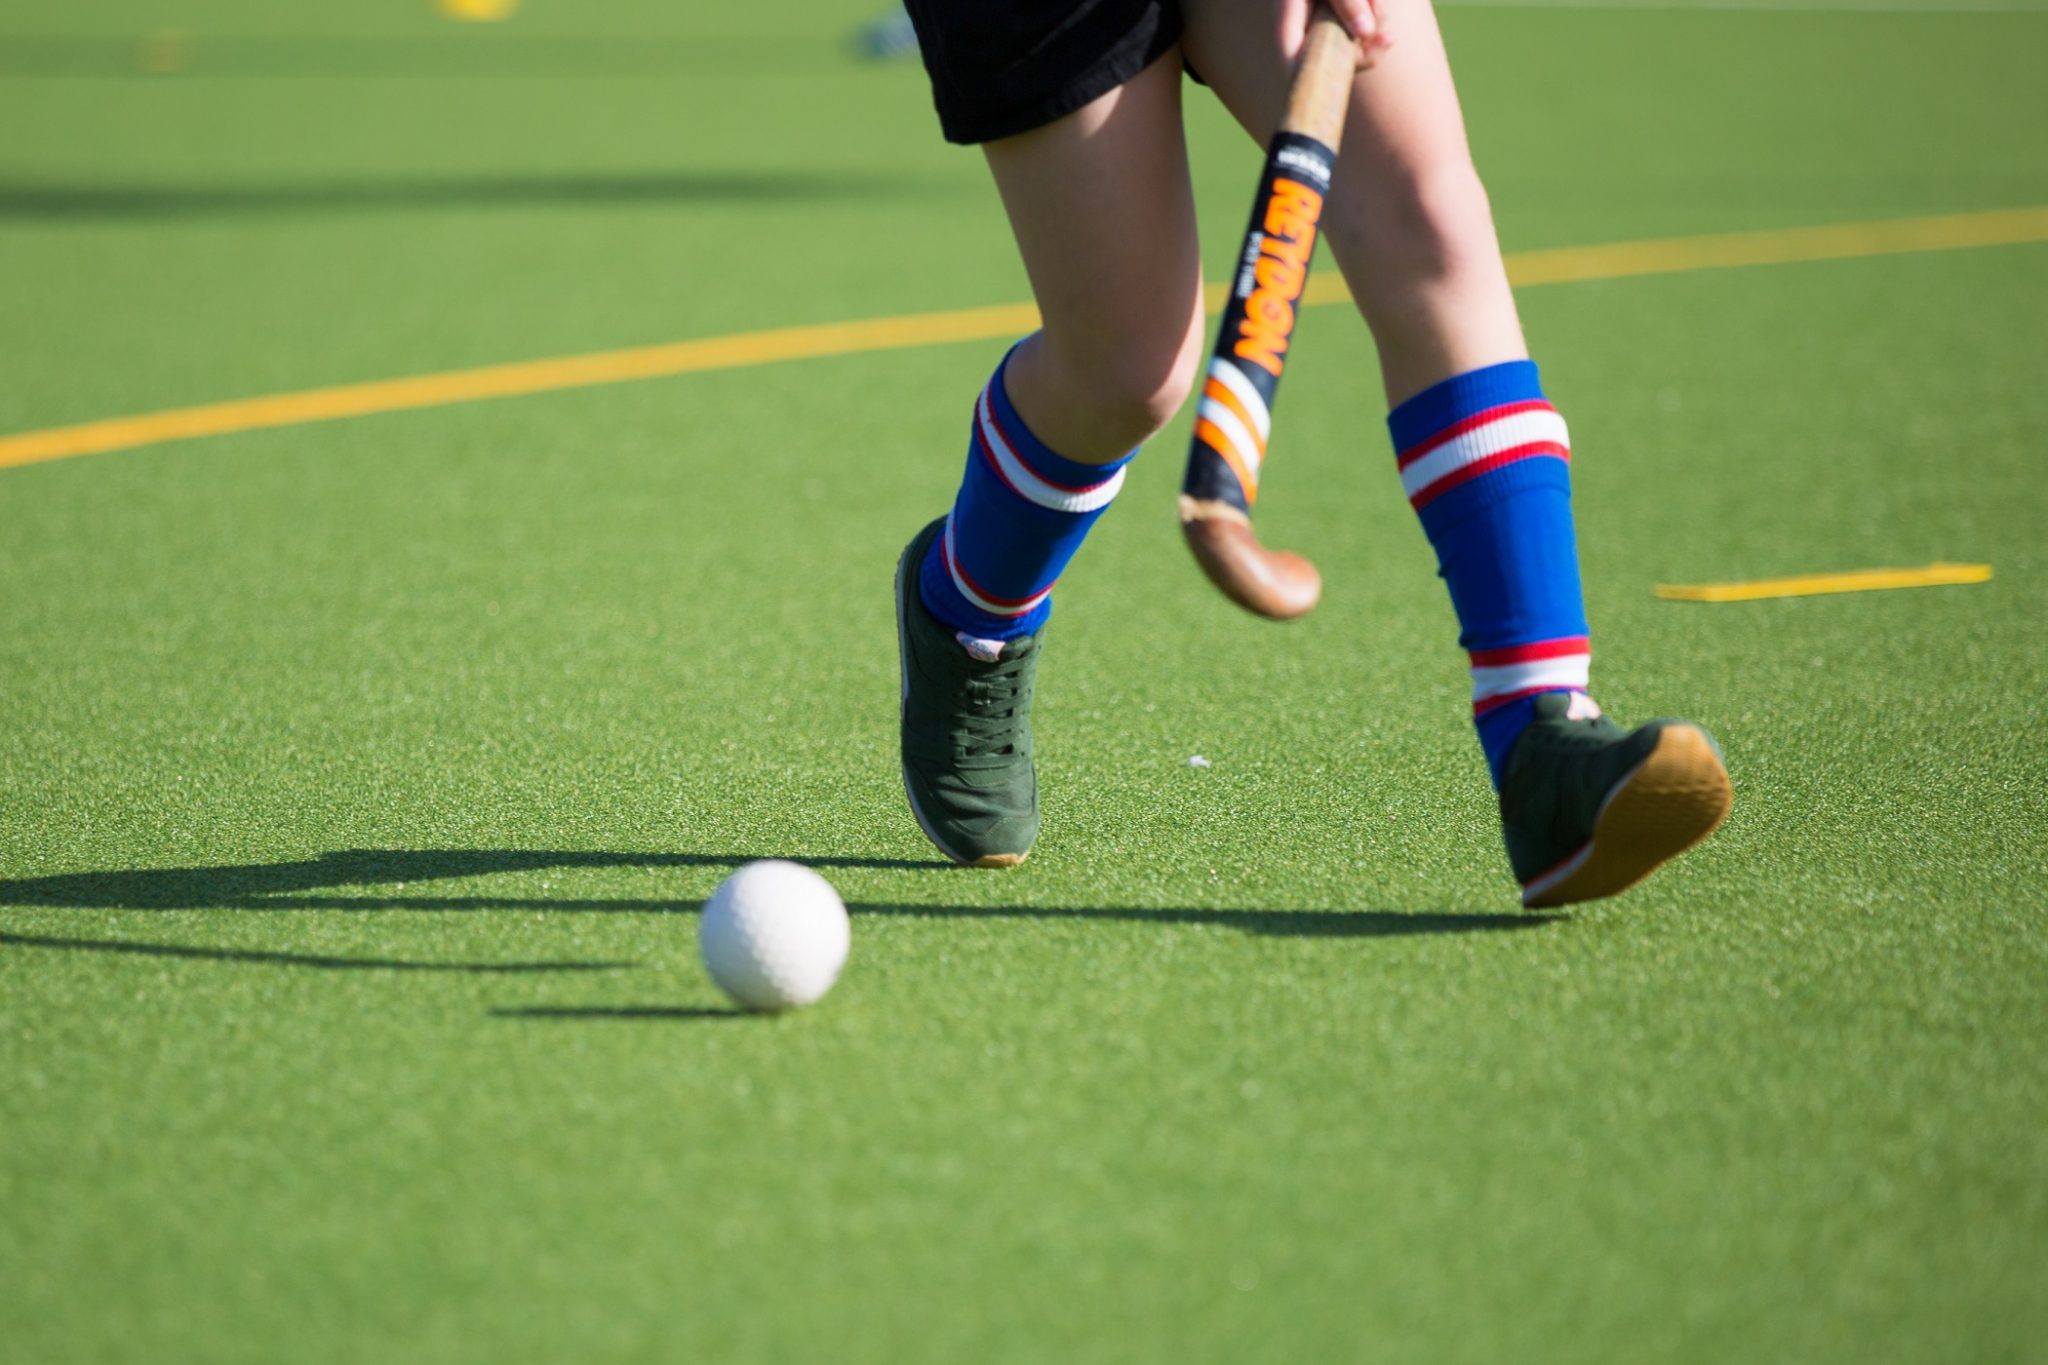 astroturf pitches: 2G, 3G, 4G 